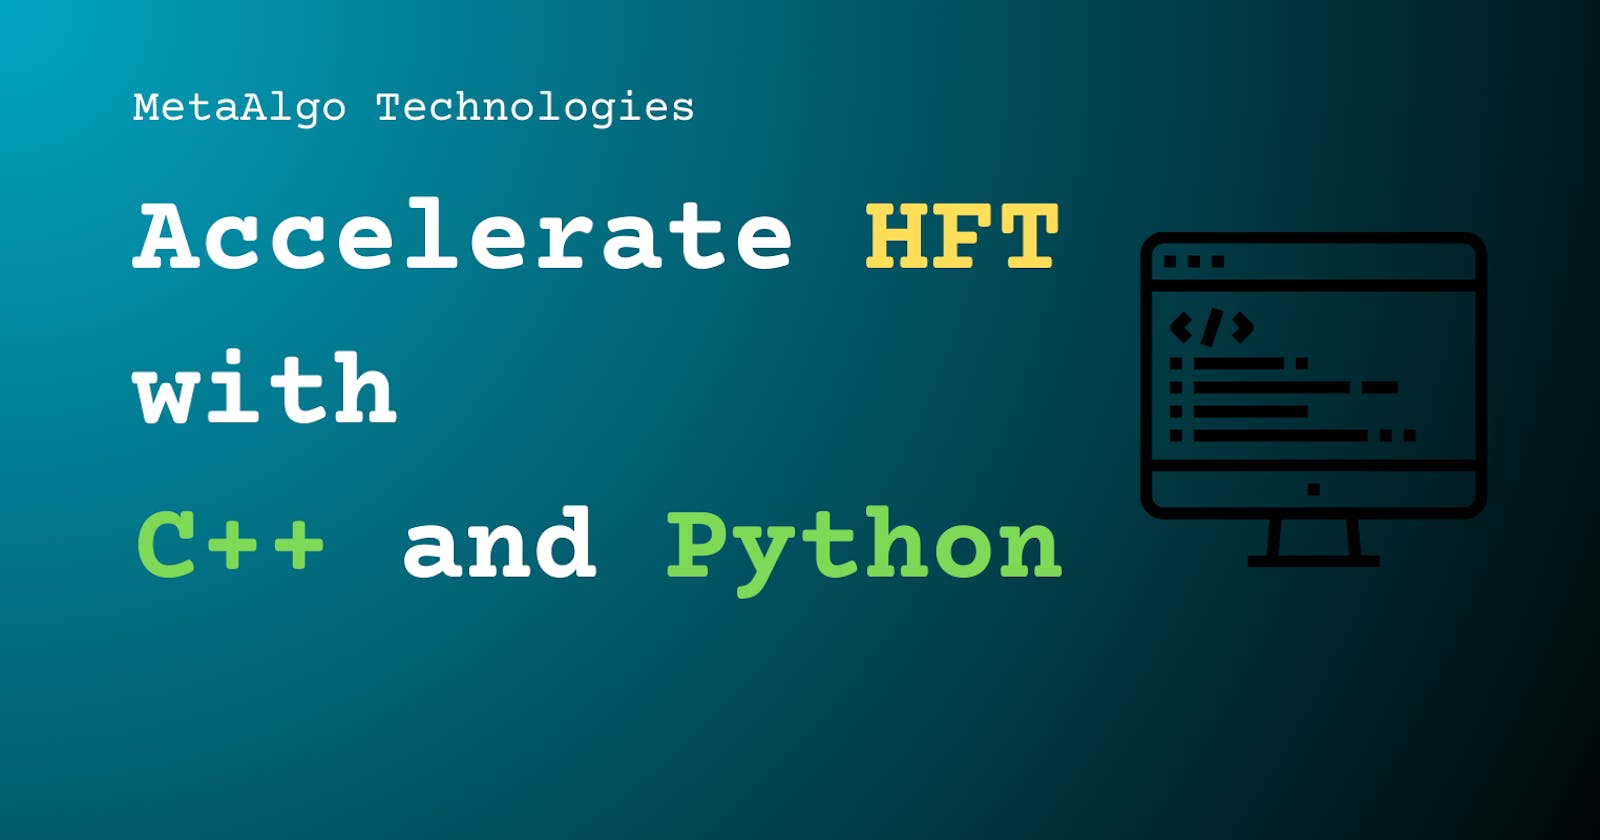 Accelerate HFT with C++ and Python